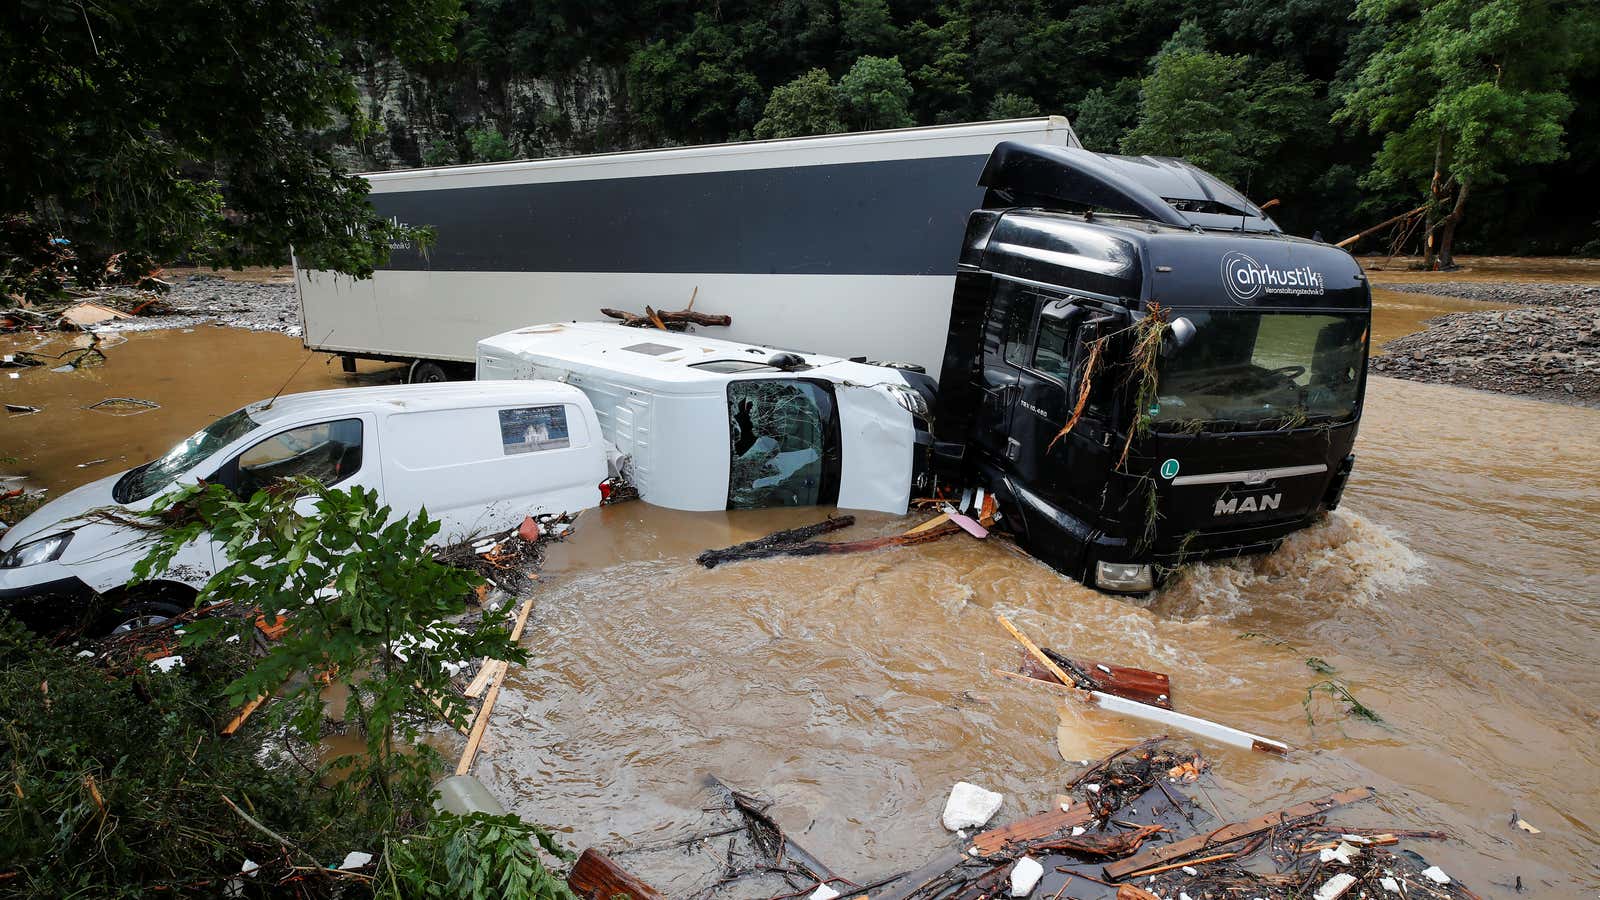 Partially submerged vehicles in Schuld, Germany.